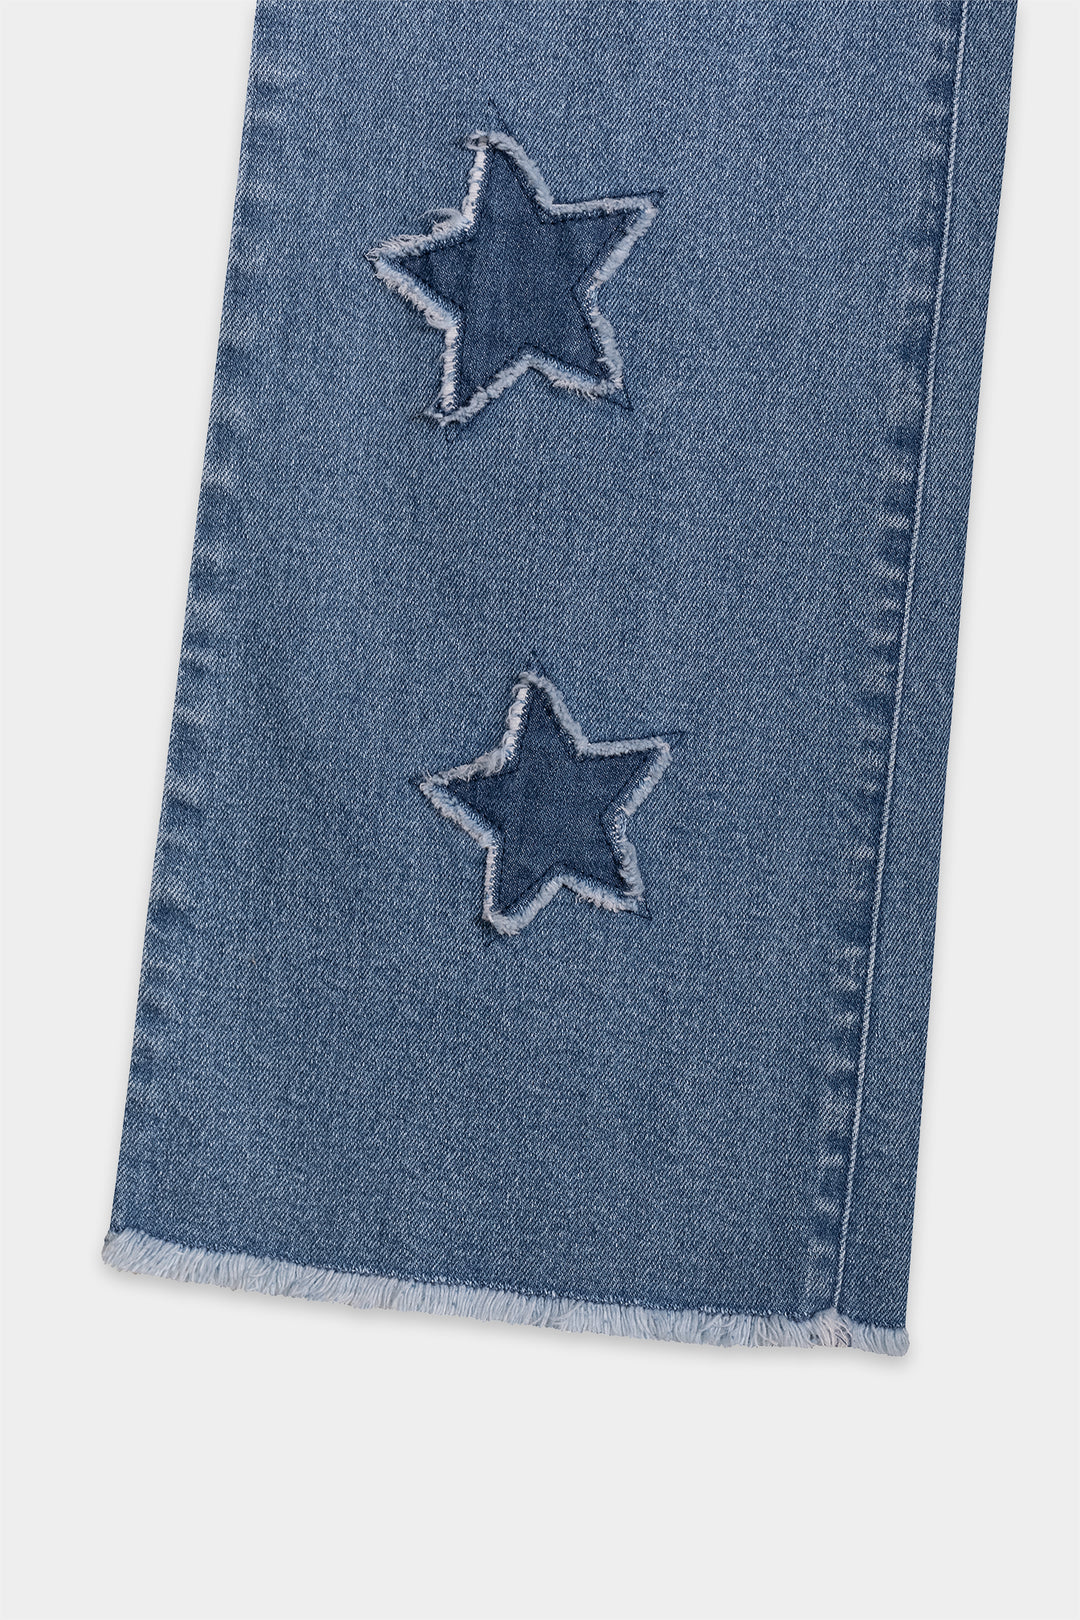 STAR PATCHWORK JEANS